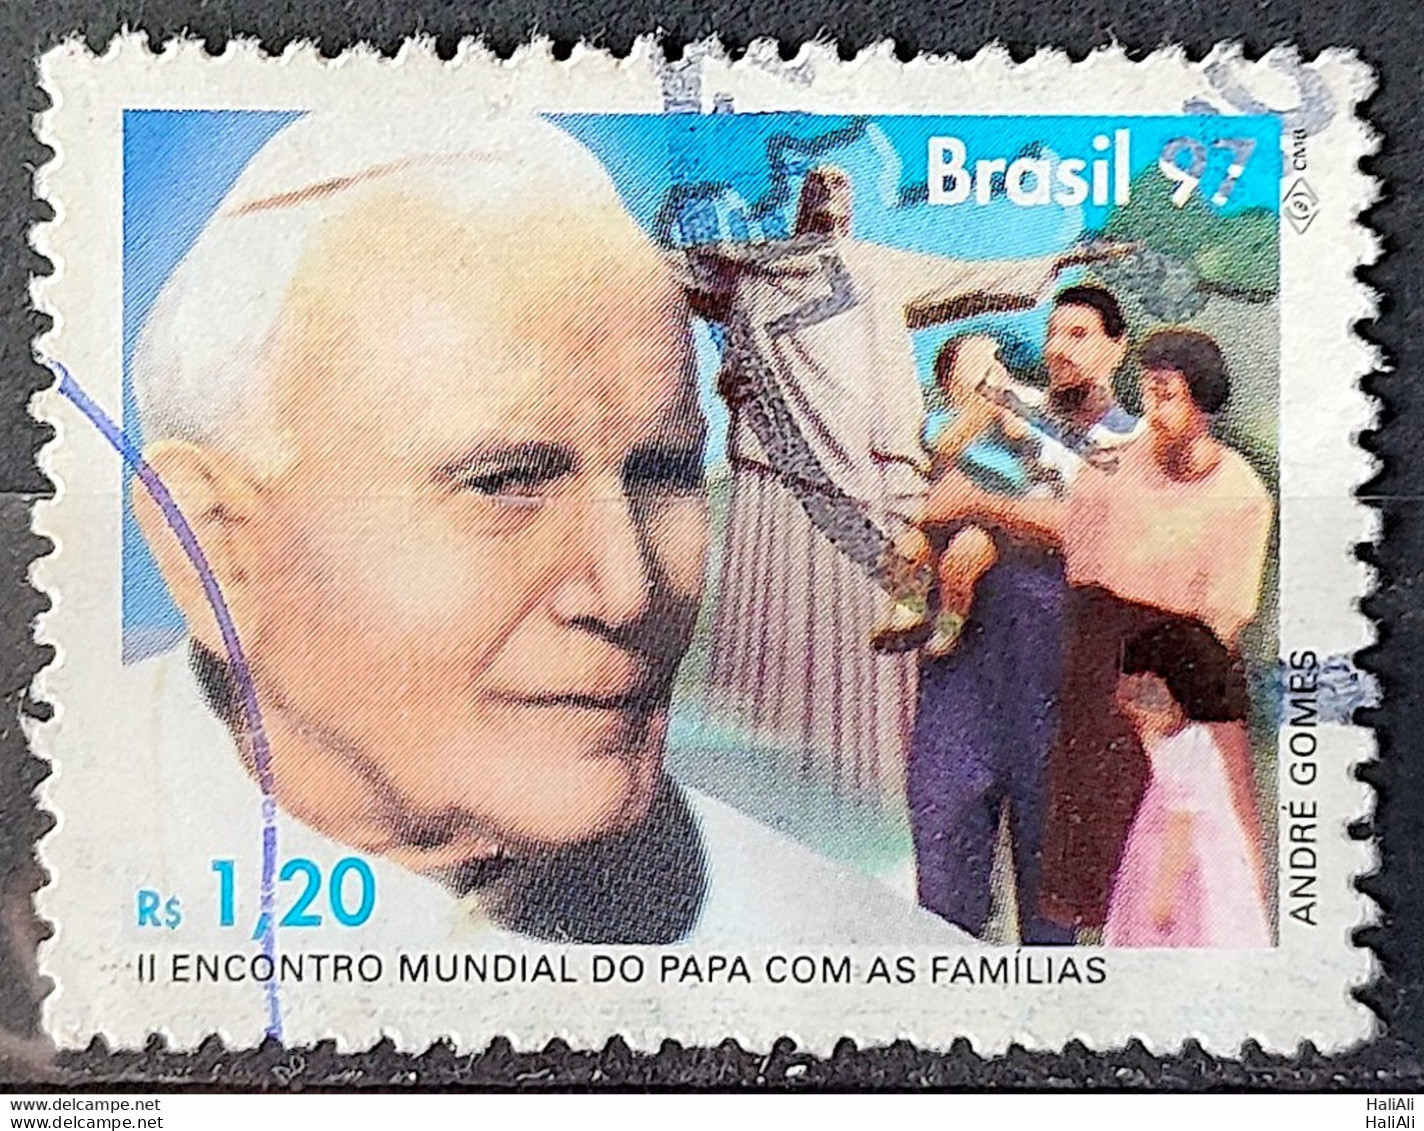 C 2043 Brazil Stamp World Pope Meeting With Families Religion 1997 Circulated 9 - Used Stamps